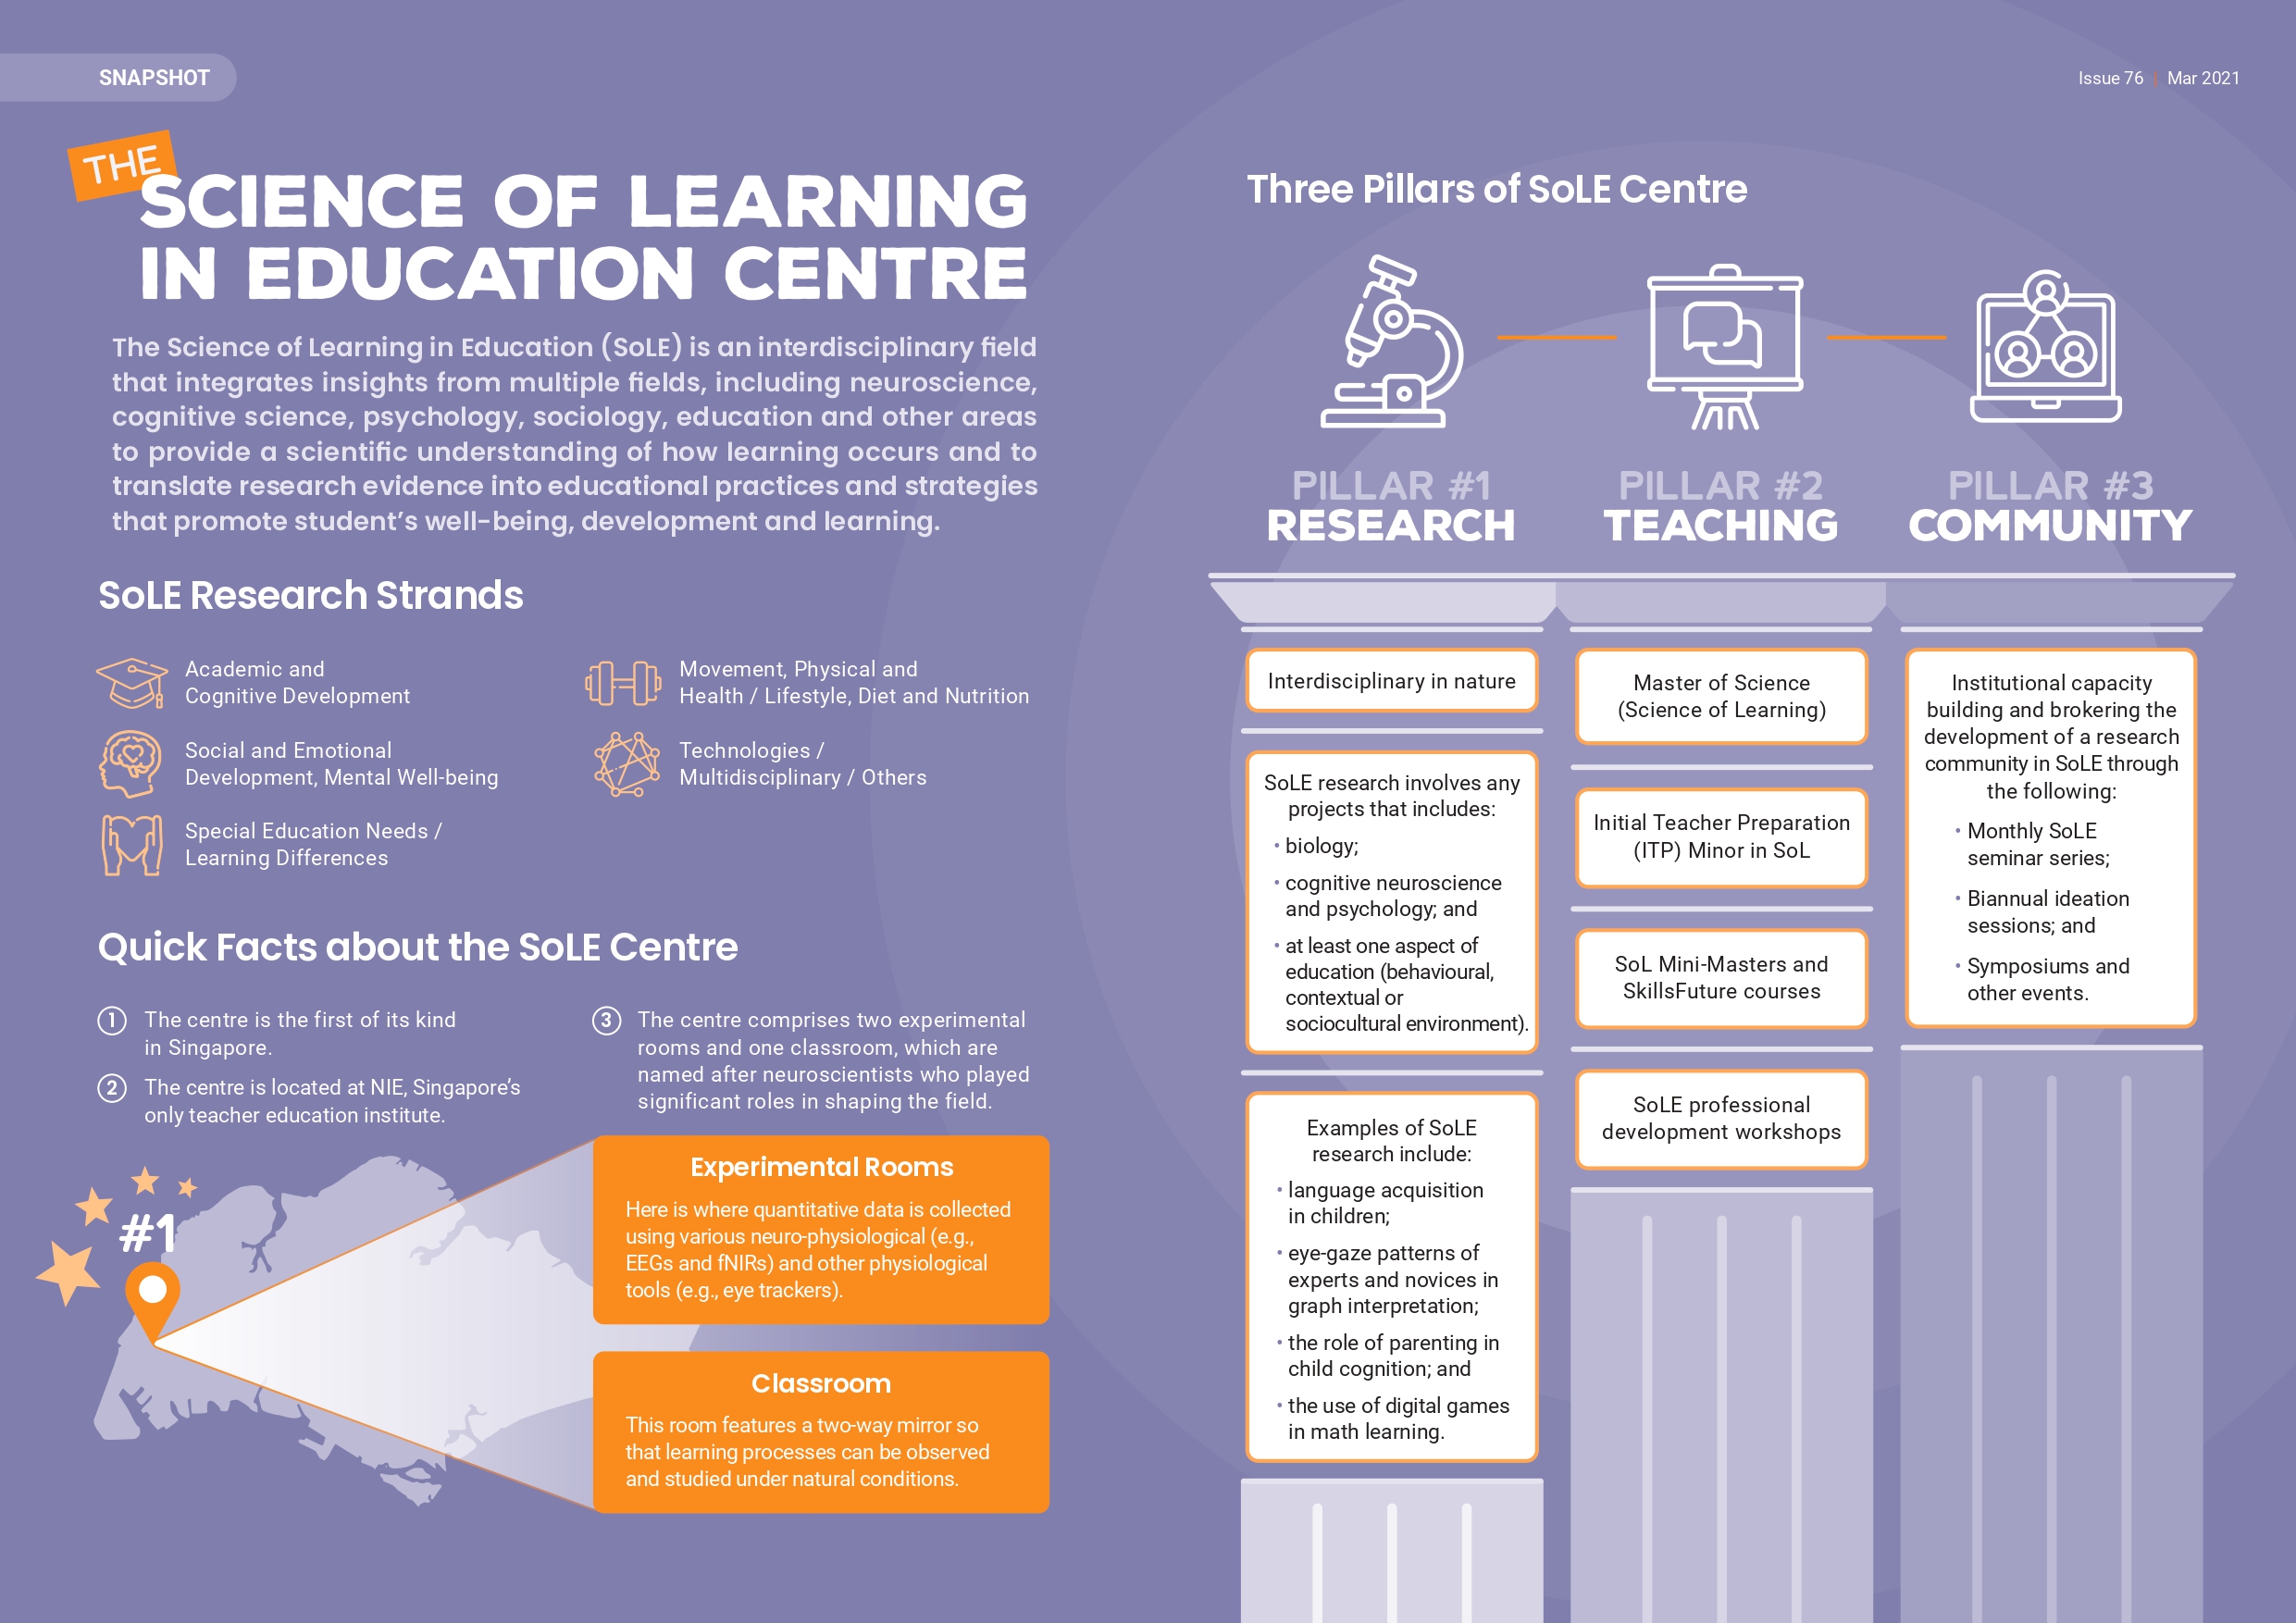 The Science of Learning in Education Centre